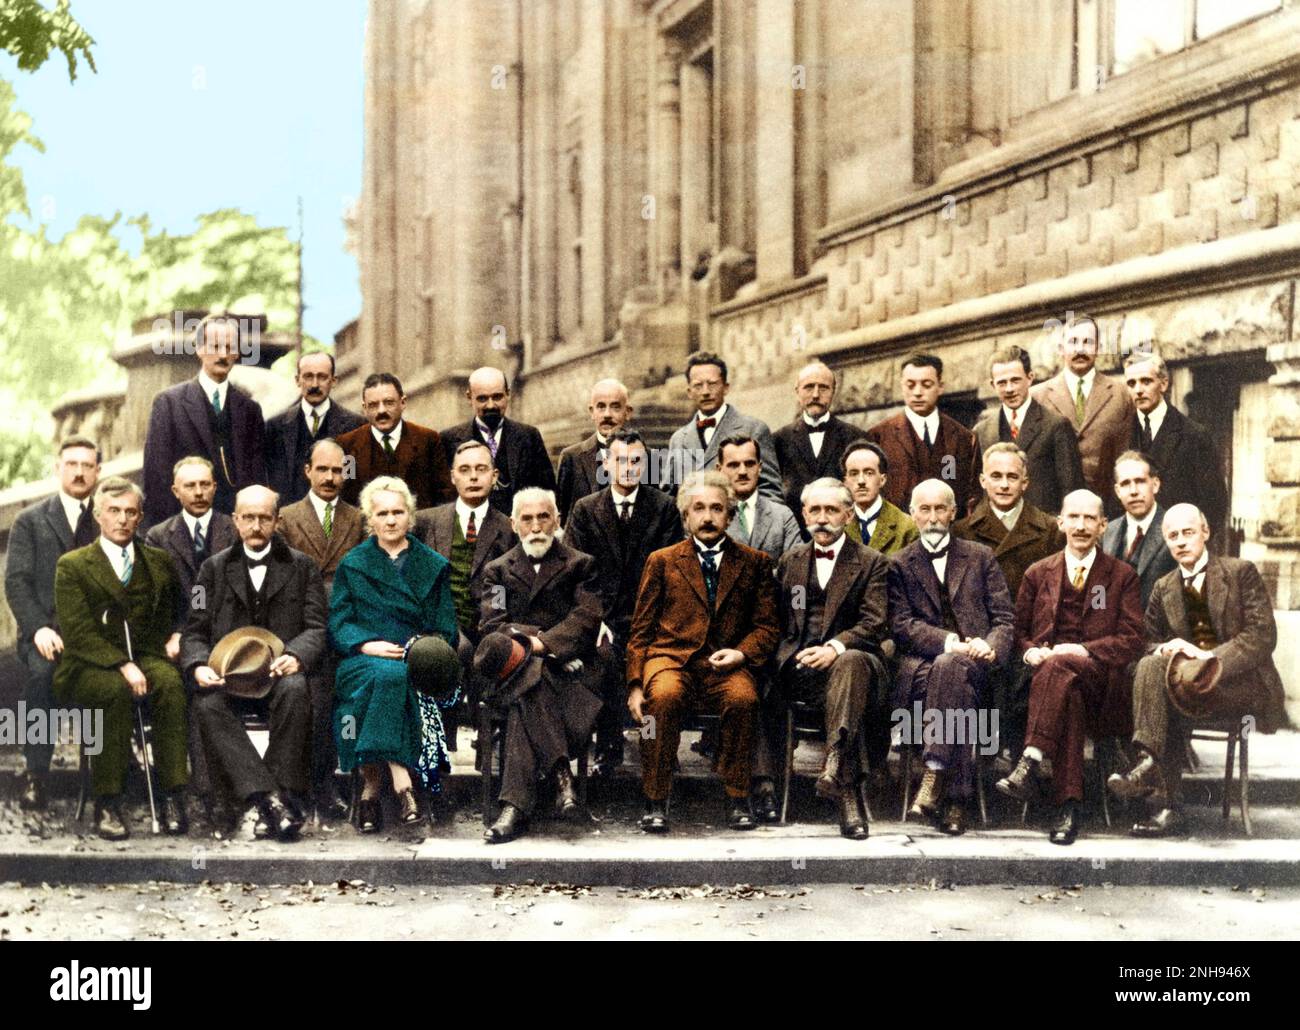 The International Solvay Institutes for Physics and Chemistry in Brussels held the first world physics conference in 1911 and began to host them every three years. The most famous conference was the fifth conference on Electrons and Photons in 1927. Attendees included Marie Curie, Albert Einstein, Niels Bohr, and Werner Heisenberg, to name a few. Of the 29 attendees, 17 were current or future Nobel Prize winners. Colorized. Stock Photo